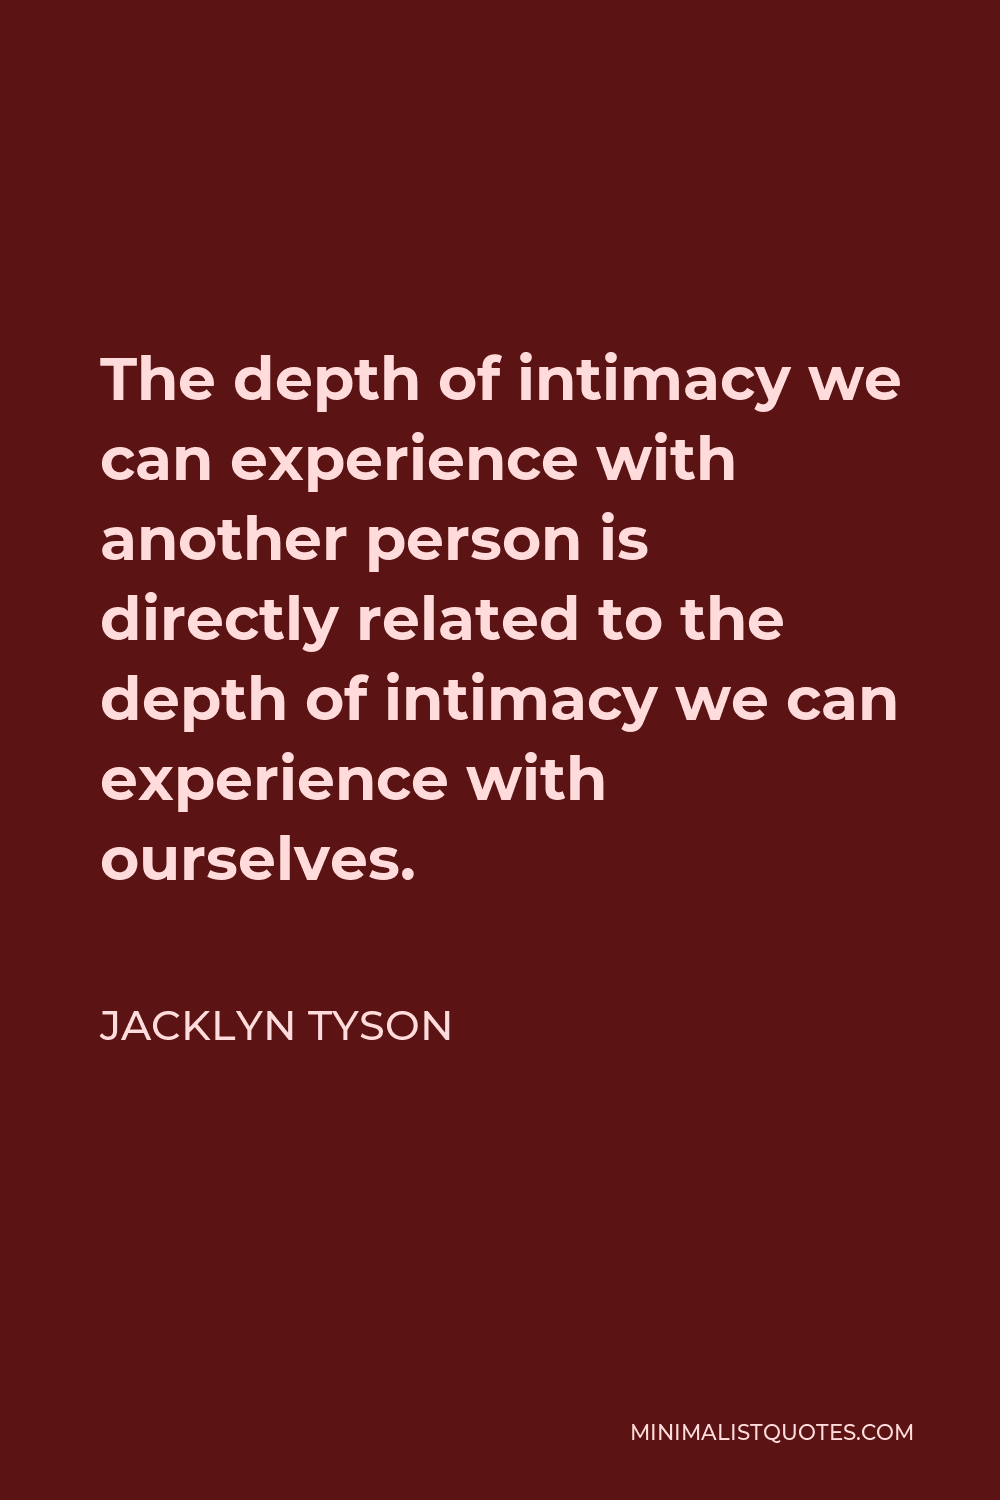 Jacklyn Tyson Quote - The depth of intimacy we can experience with another person is directly related to the depth of intimacy we can experience with ourselves.